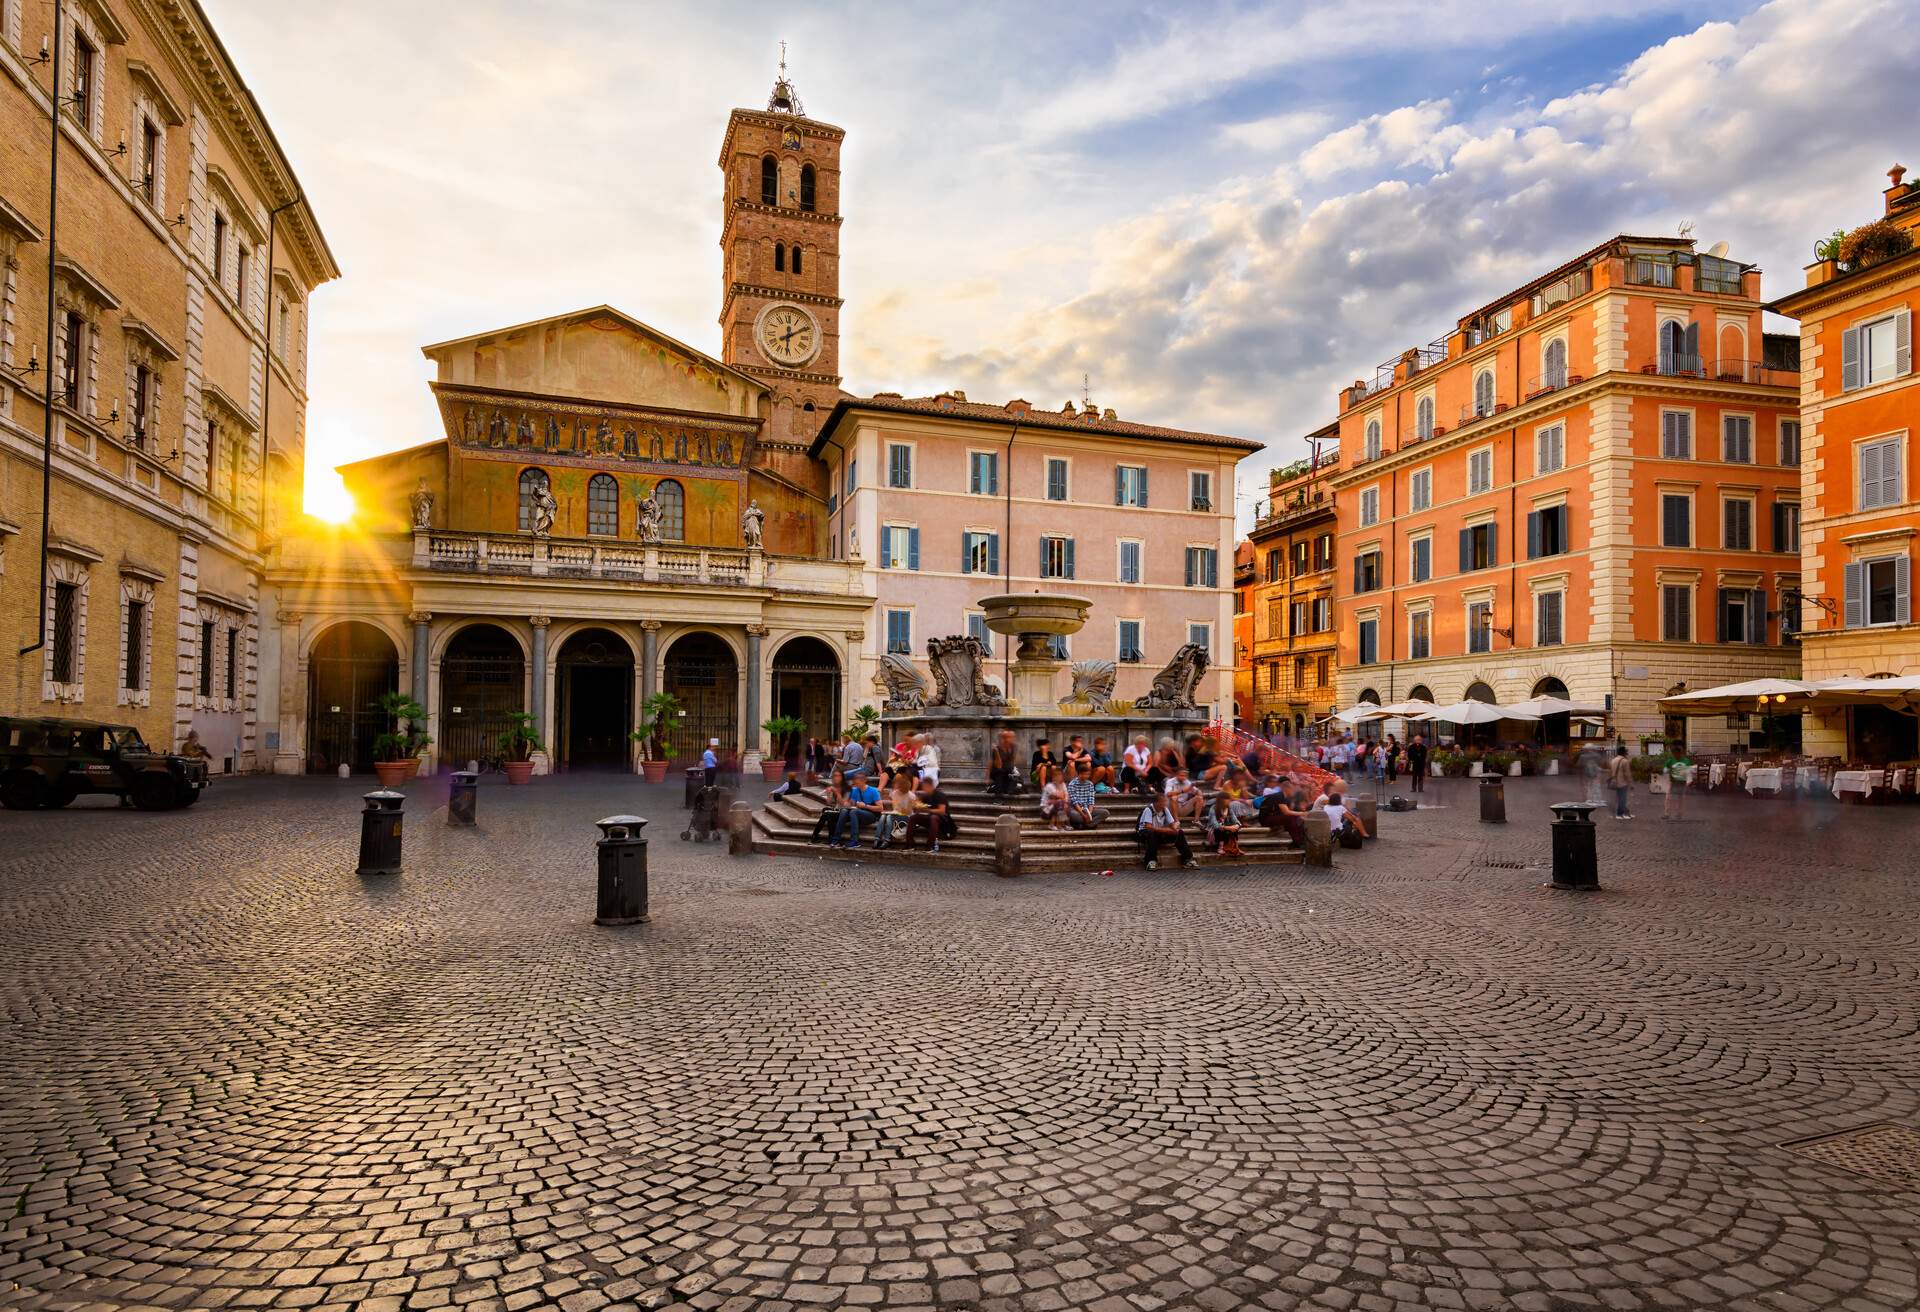 Basilica di Santa Maria in Trastevere and Piazza di Santa Maria in Trastevere at sunset, Rome, Italy. Trastevere is rione of Rome, on west bank of Tiber in Rome. Architecture and landmark of Rome.; Shutterstock ID 676279045; Purpose: Content; Brand (KAYAK, Momondo, Any): Momondo